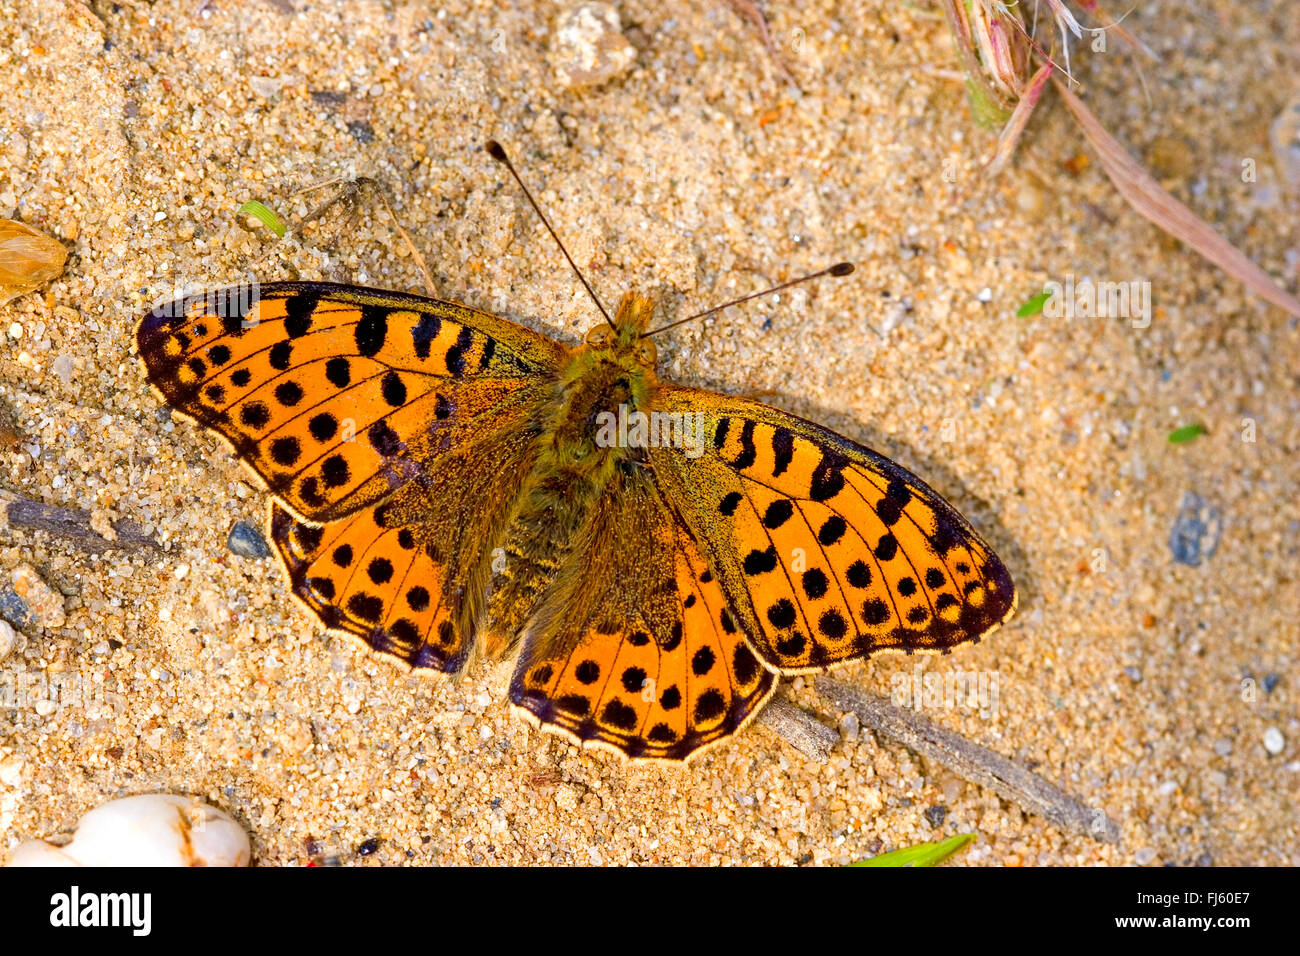 Queen of Spain fritillary (Argynnis lathonia, Issoria lathonia), sits on the ground, Germany Stock Photo